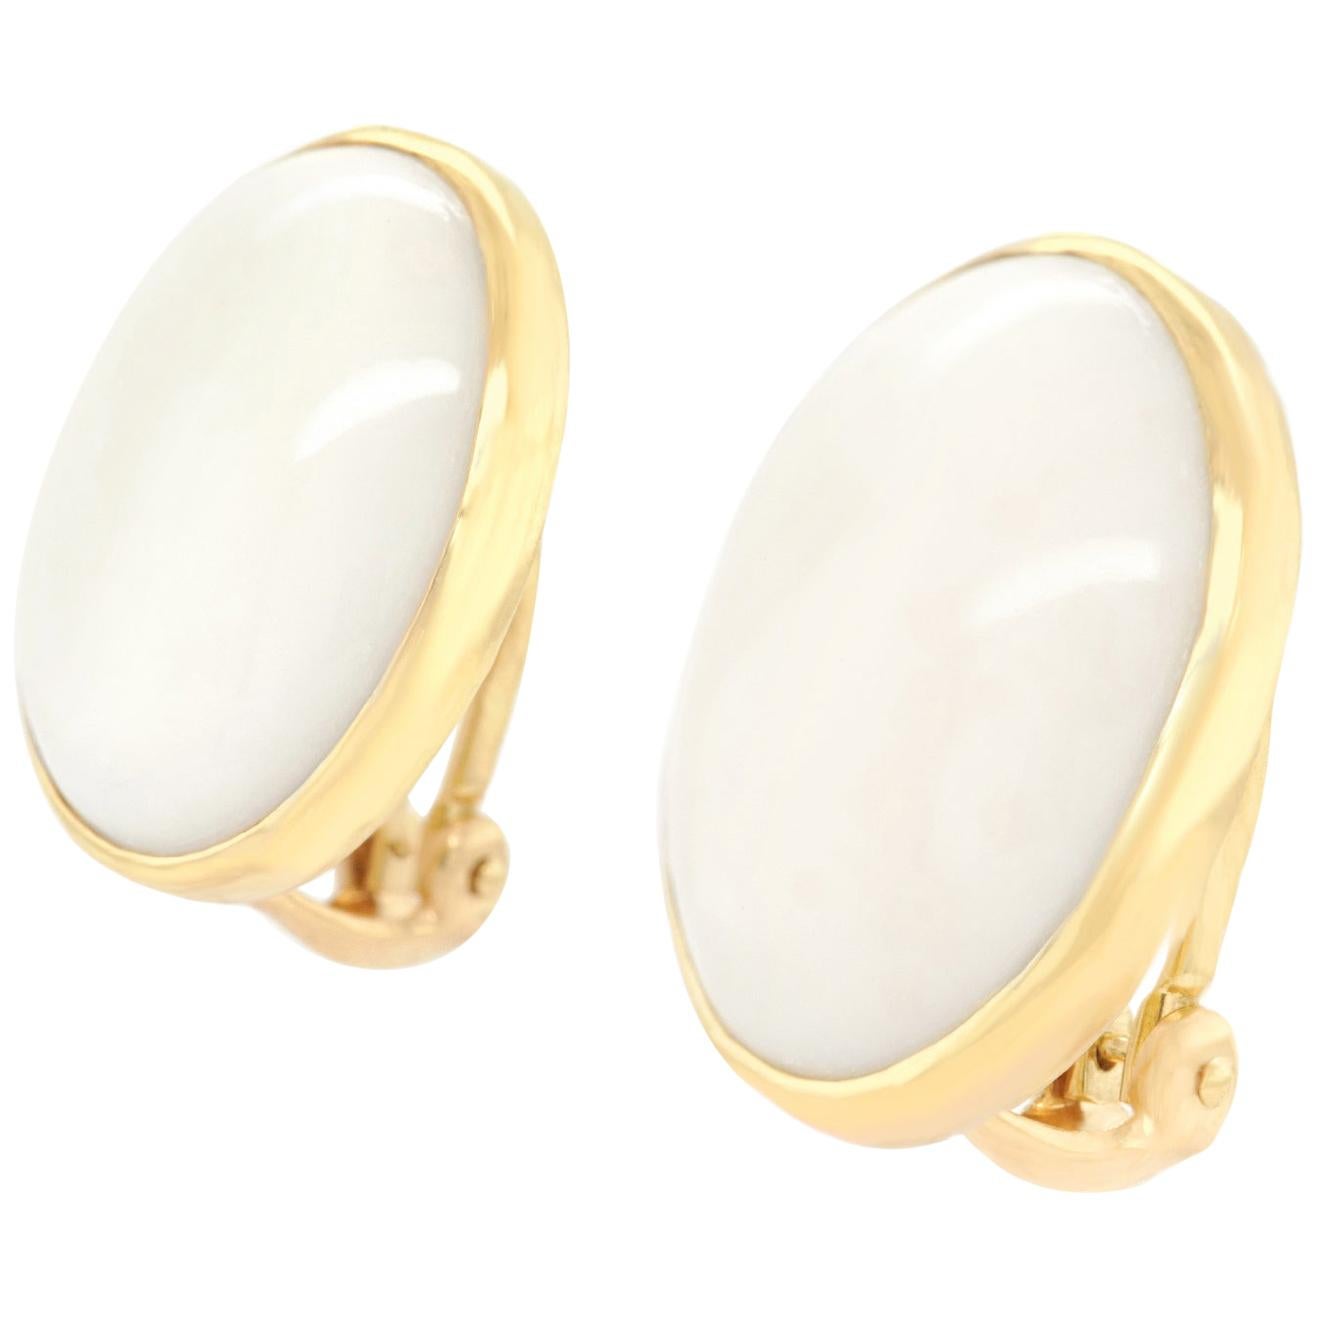 White Coral Earrings by Gump's of San Francisco